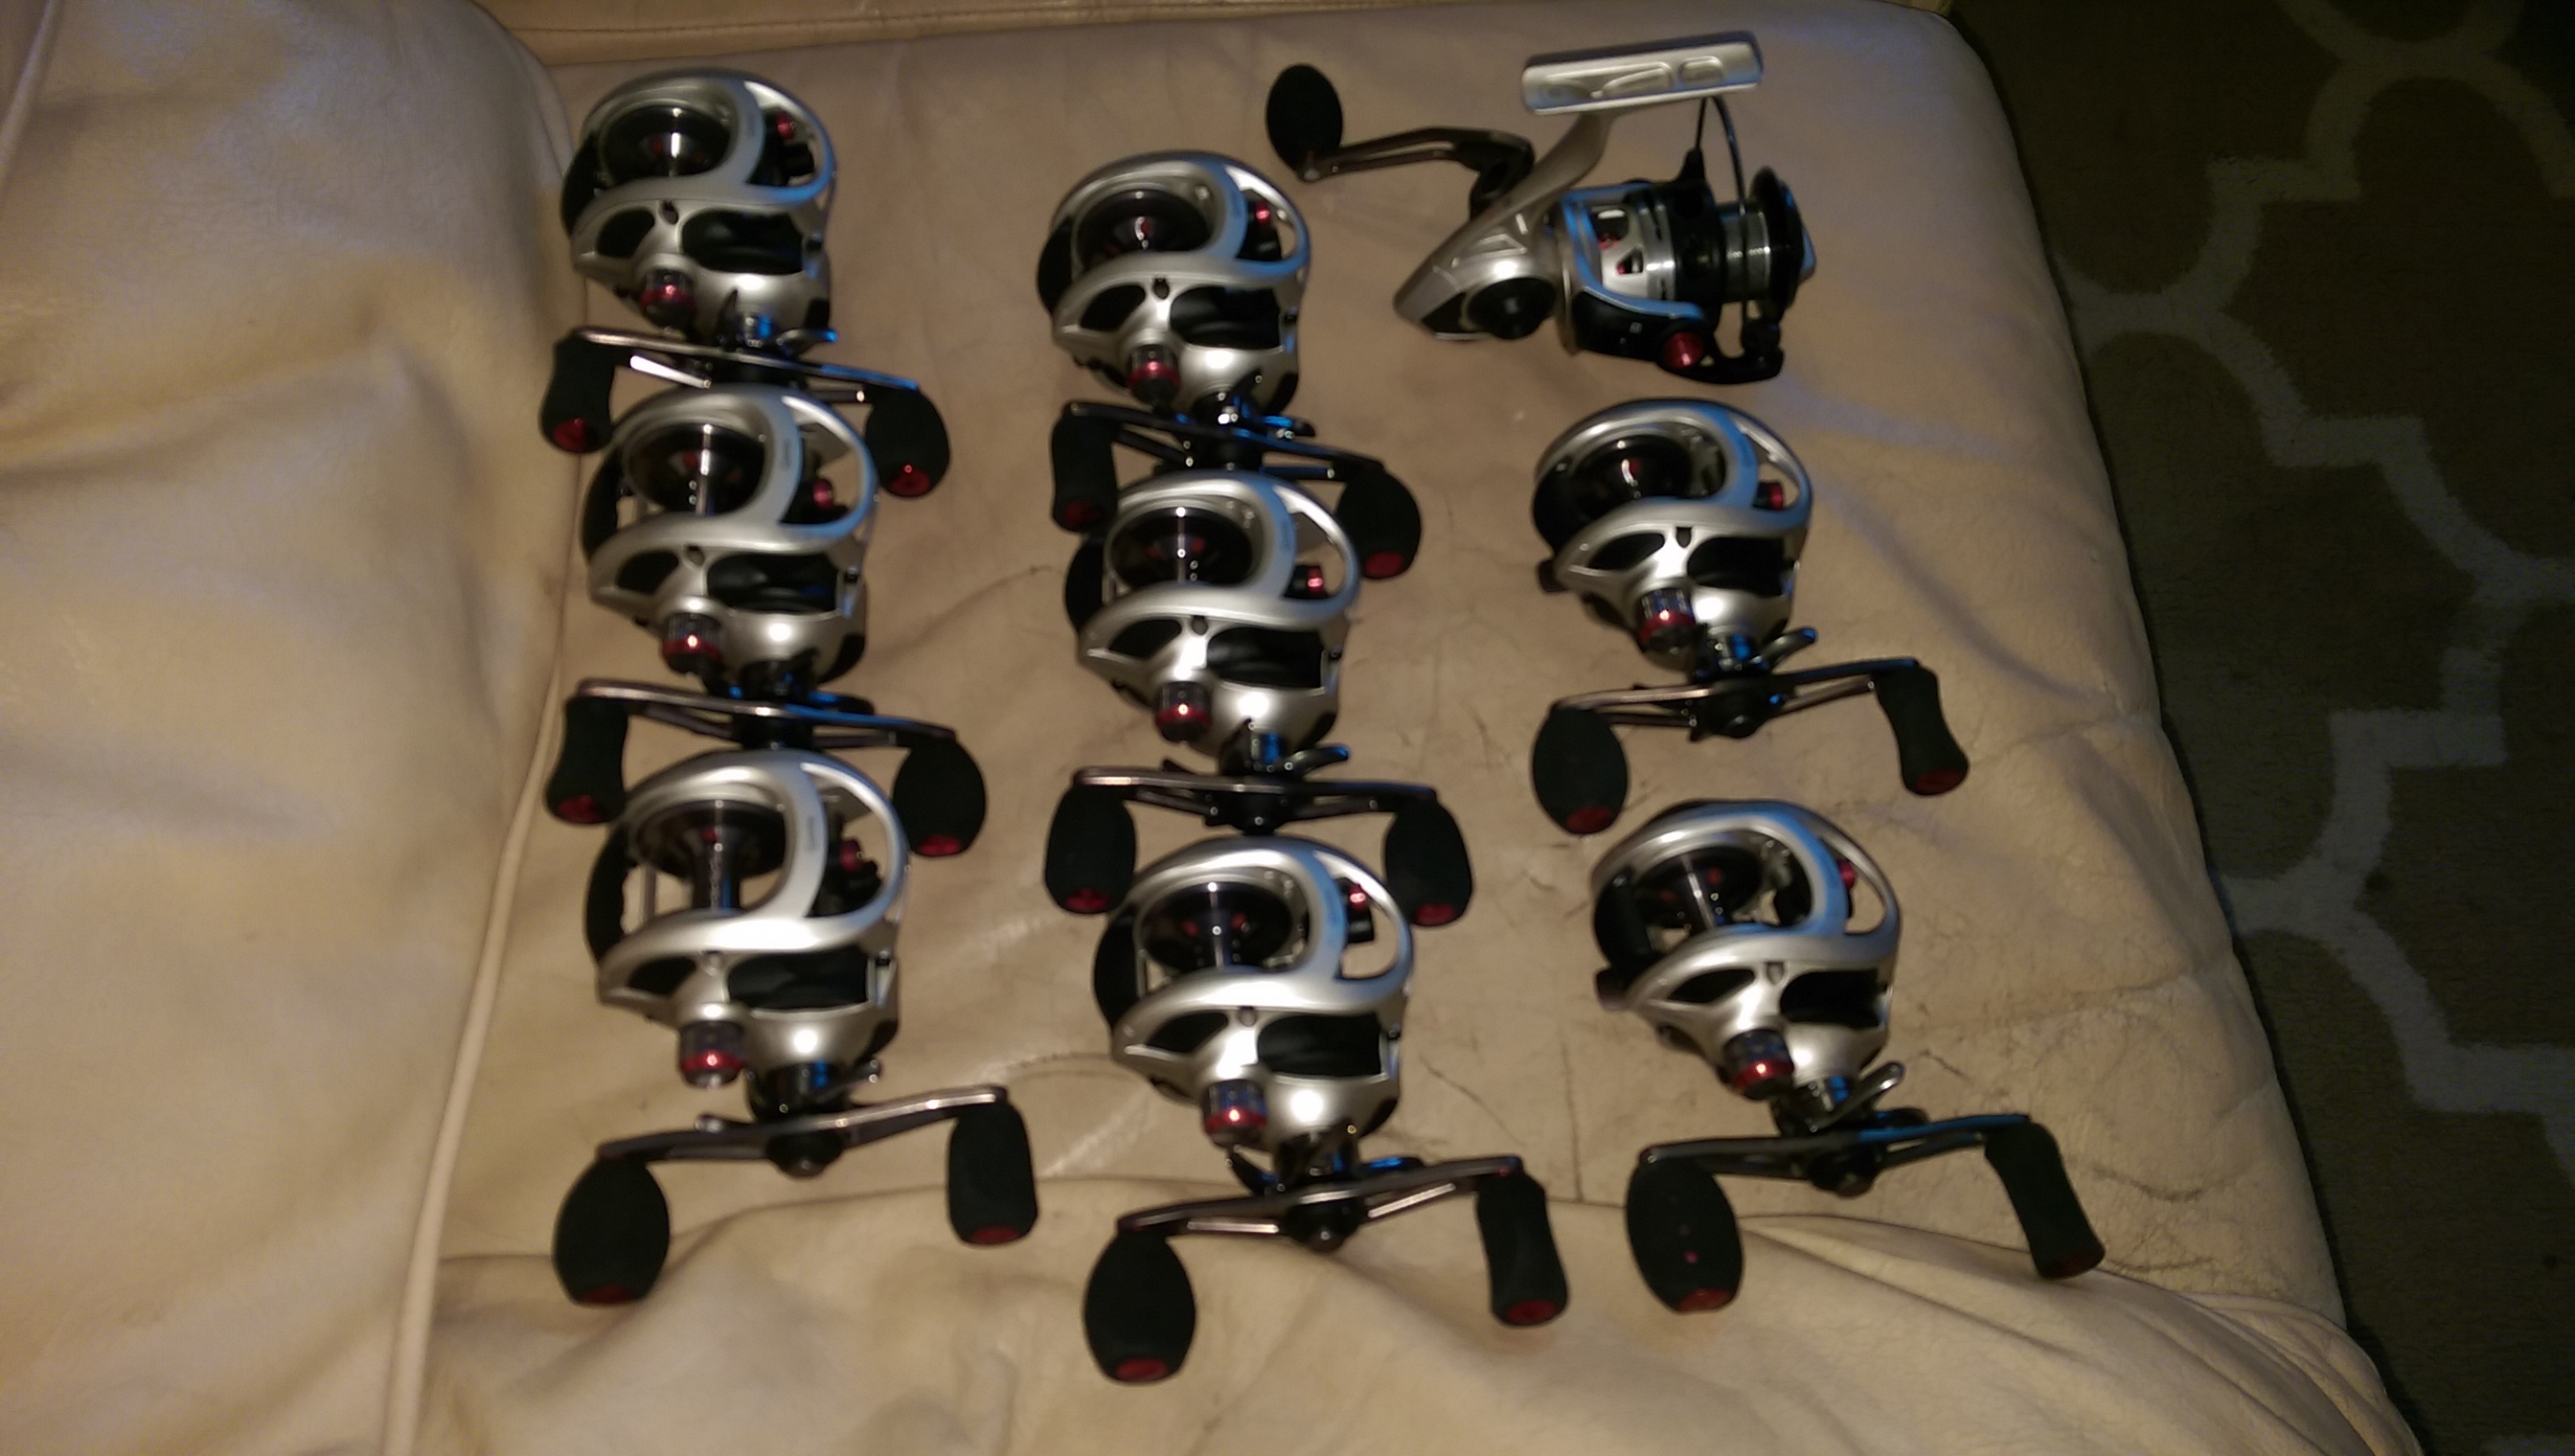 Quantum exo100hpt - Fishing Rods, Reels, Line, and Knots - Bass